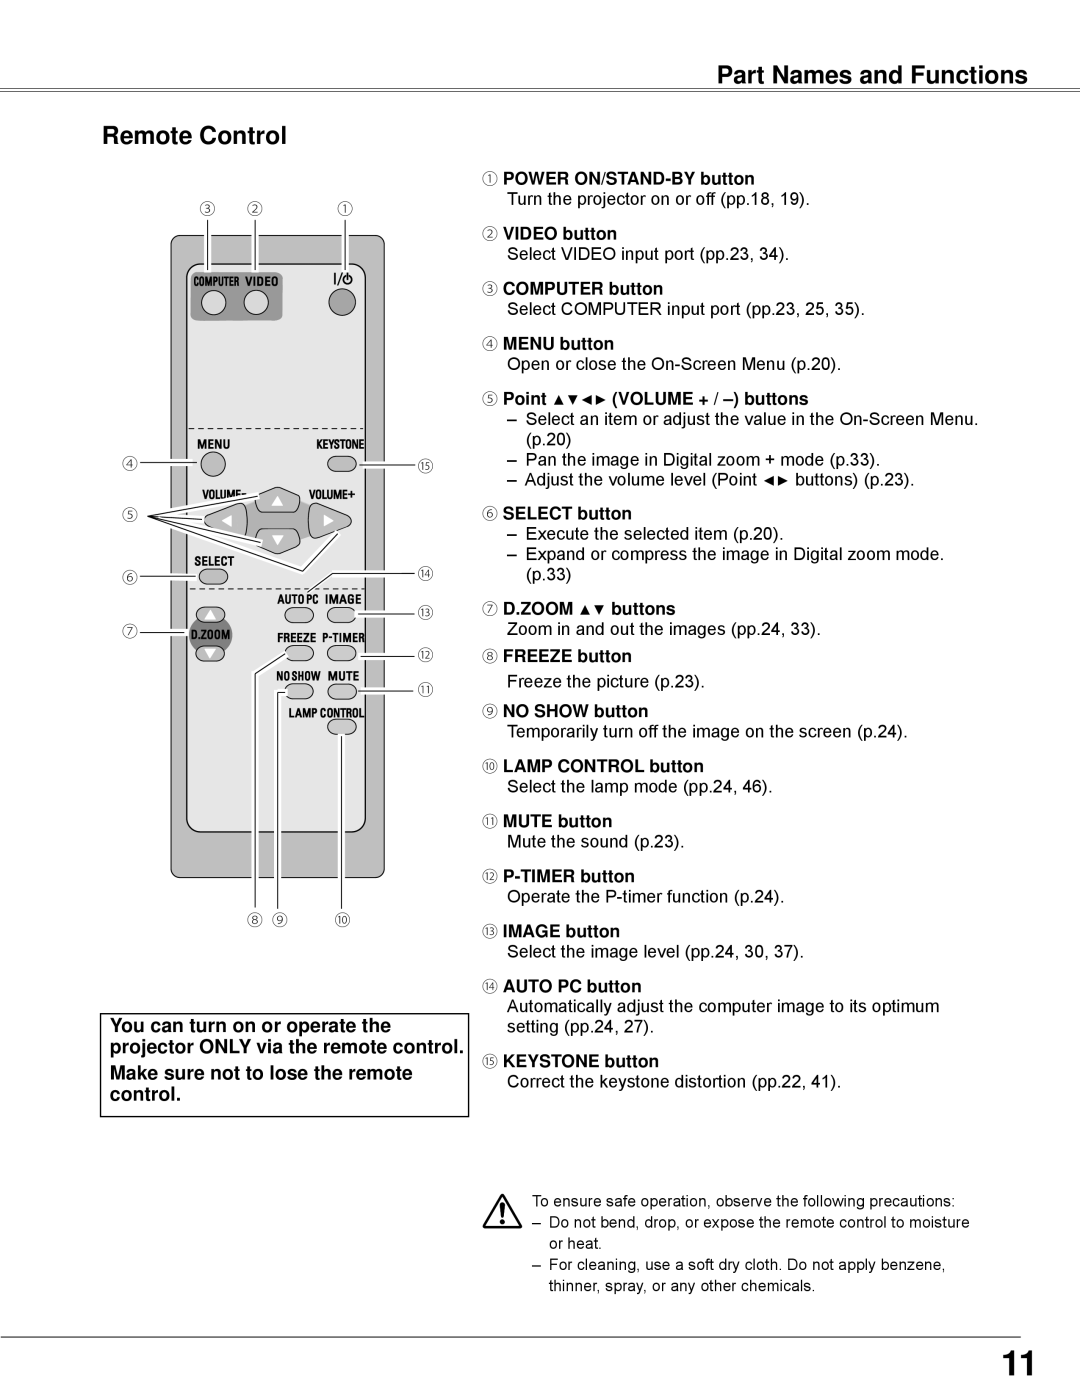 Sanyo PLC-WXE45 Part Names and Functions, Remote Control, ①POWER ON/STAND-BYbutton, ②VIDEO button, ③COMPUTER button 